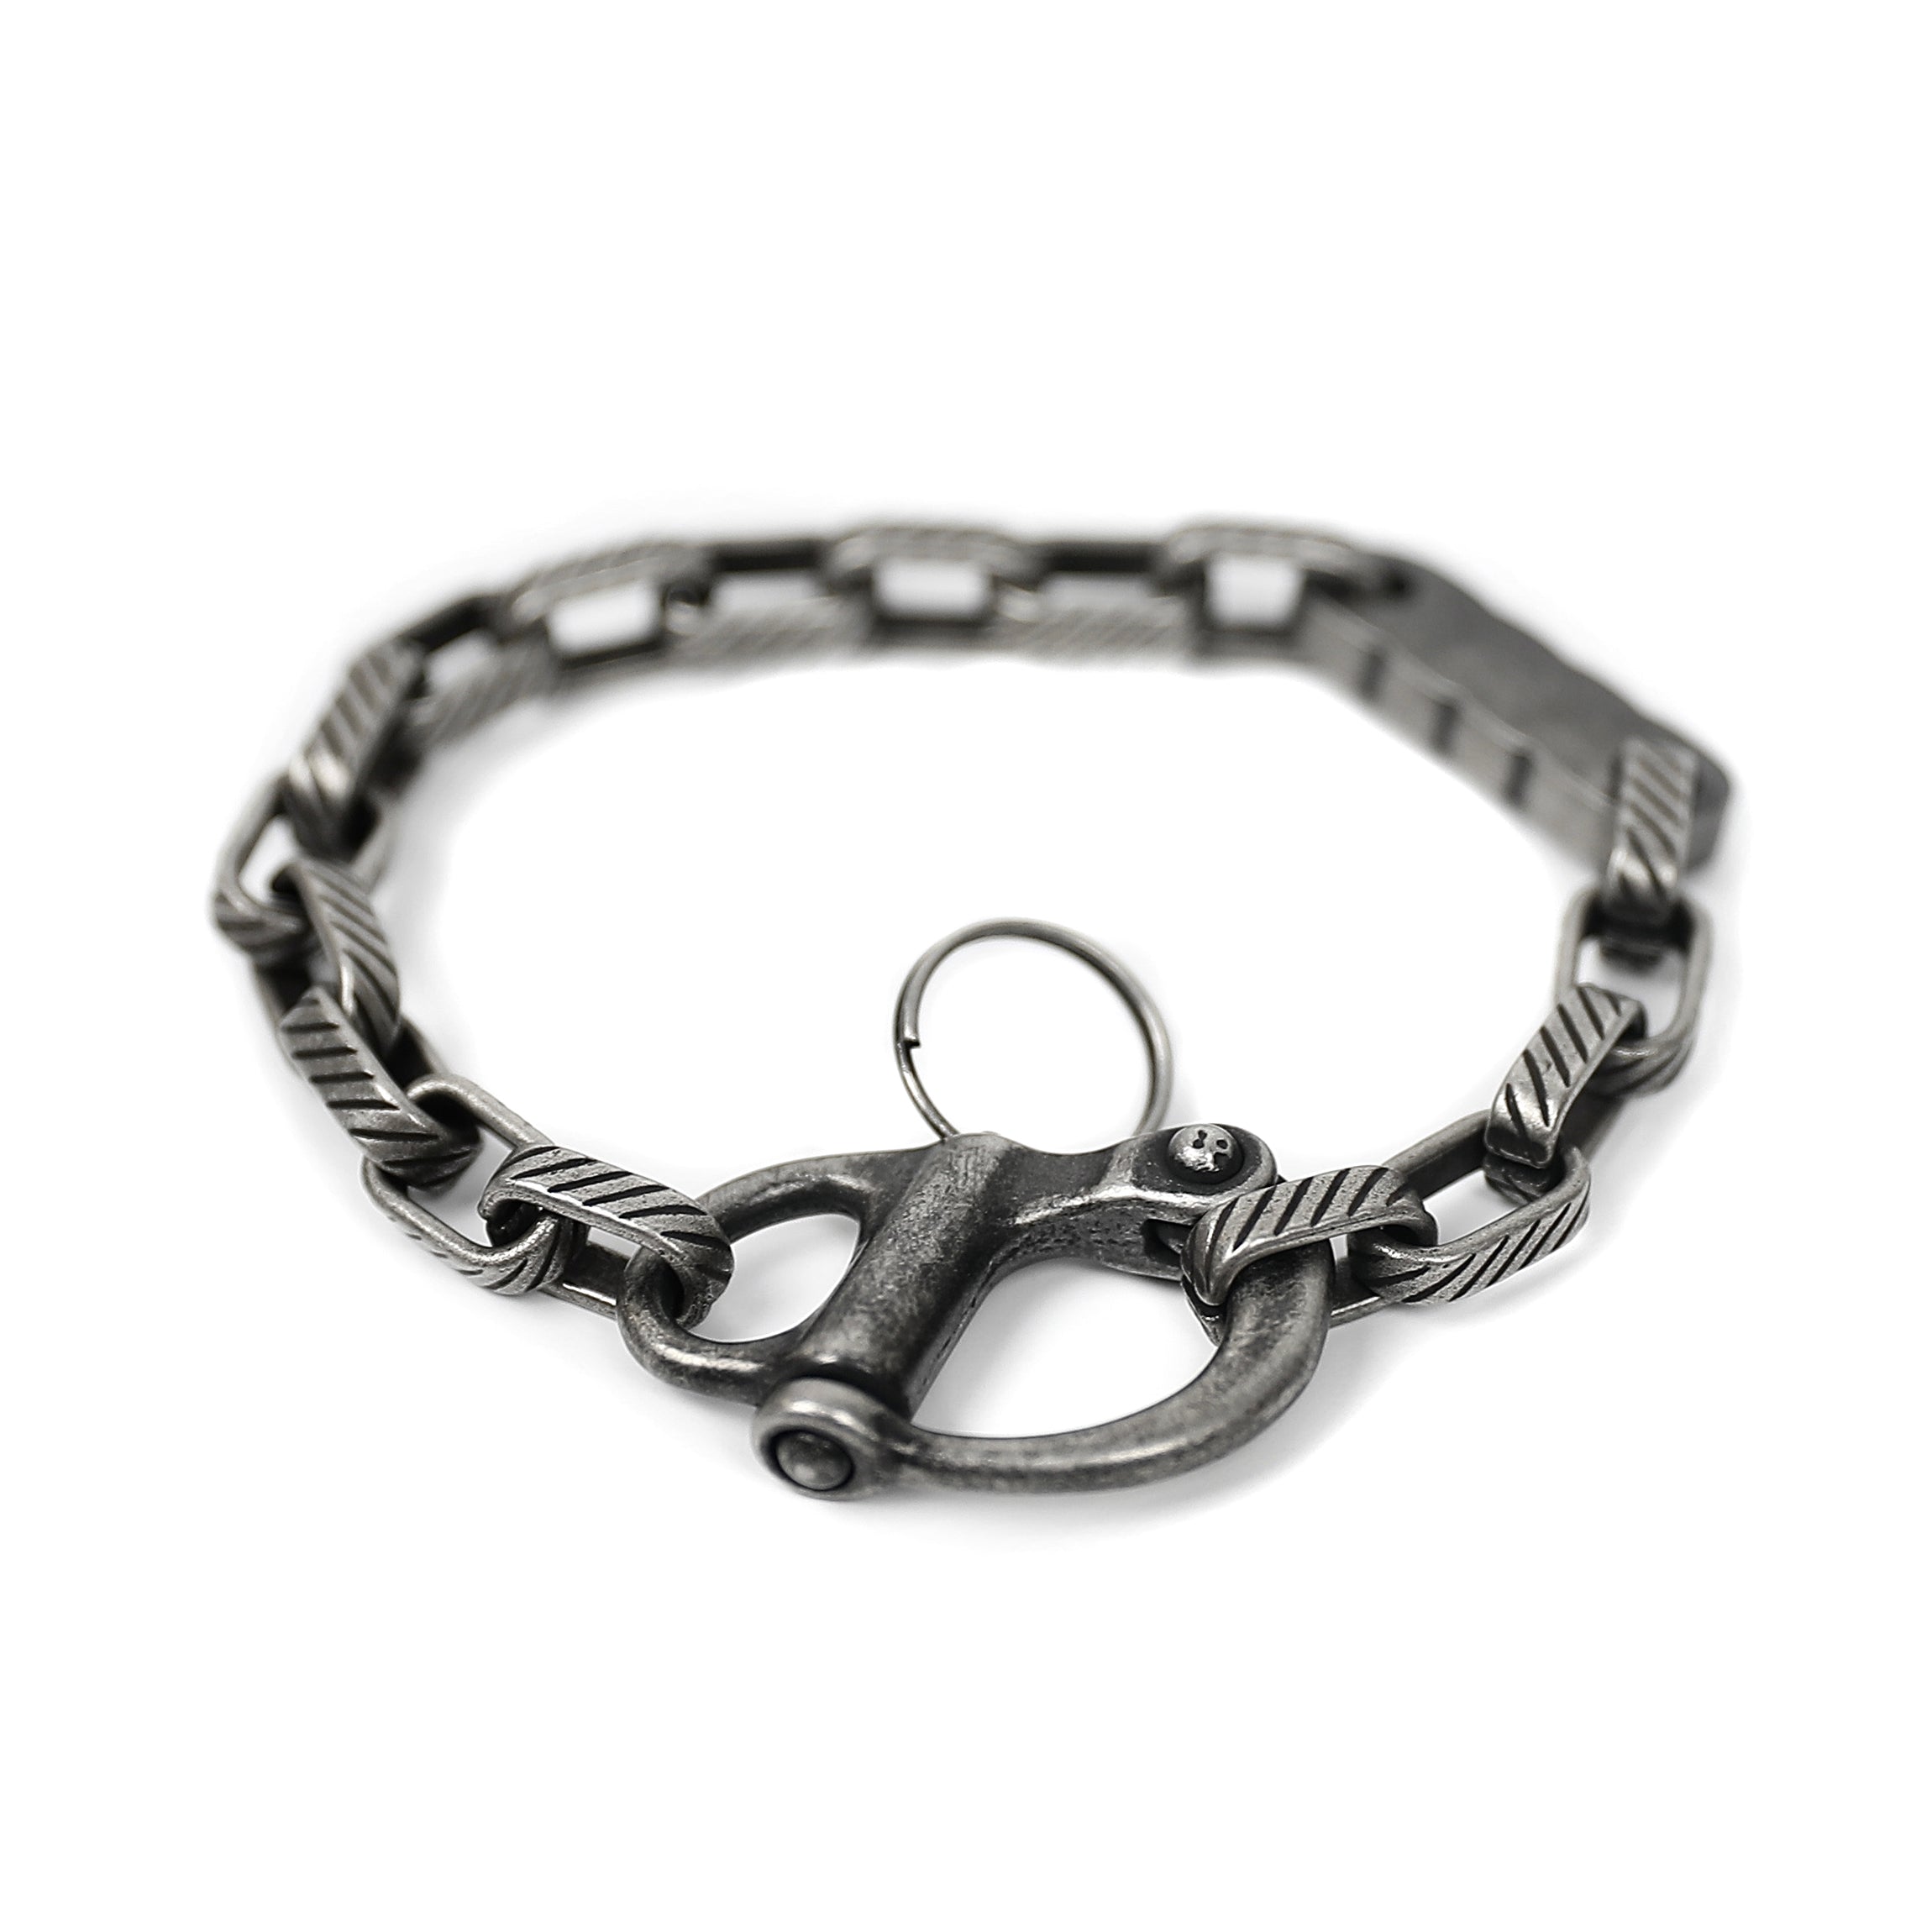 Shackle Chain Bracelet - Aged Silver 8mm